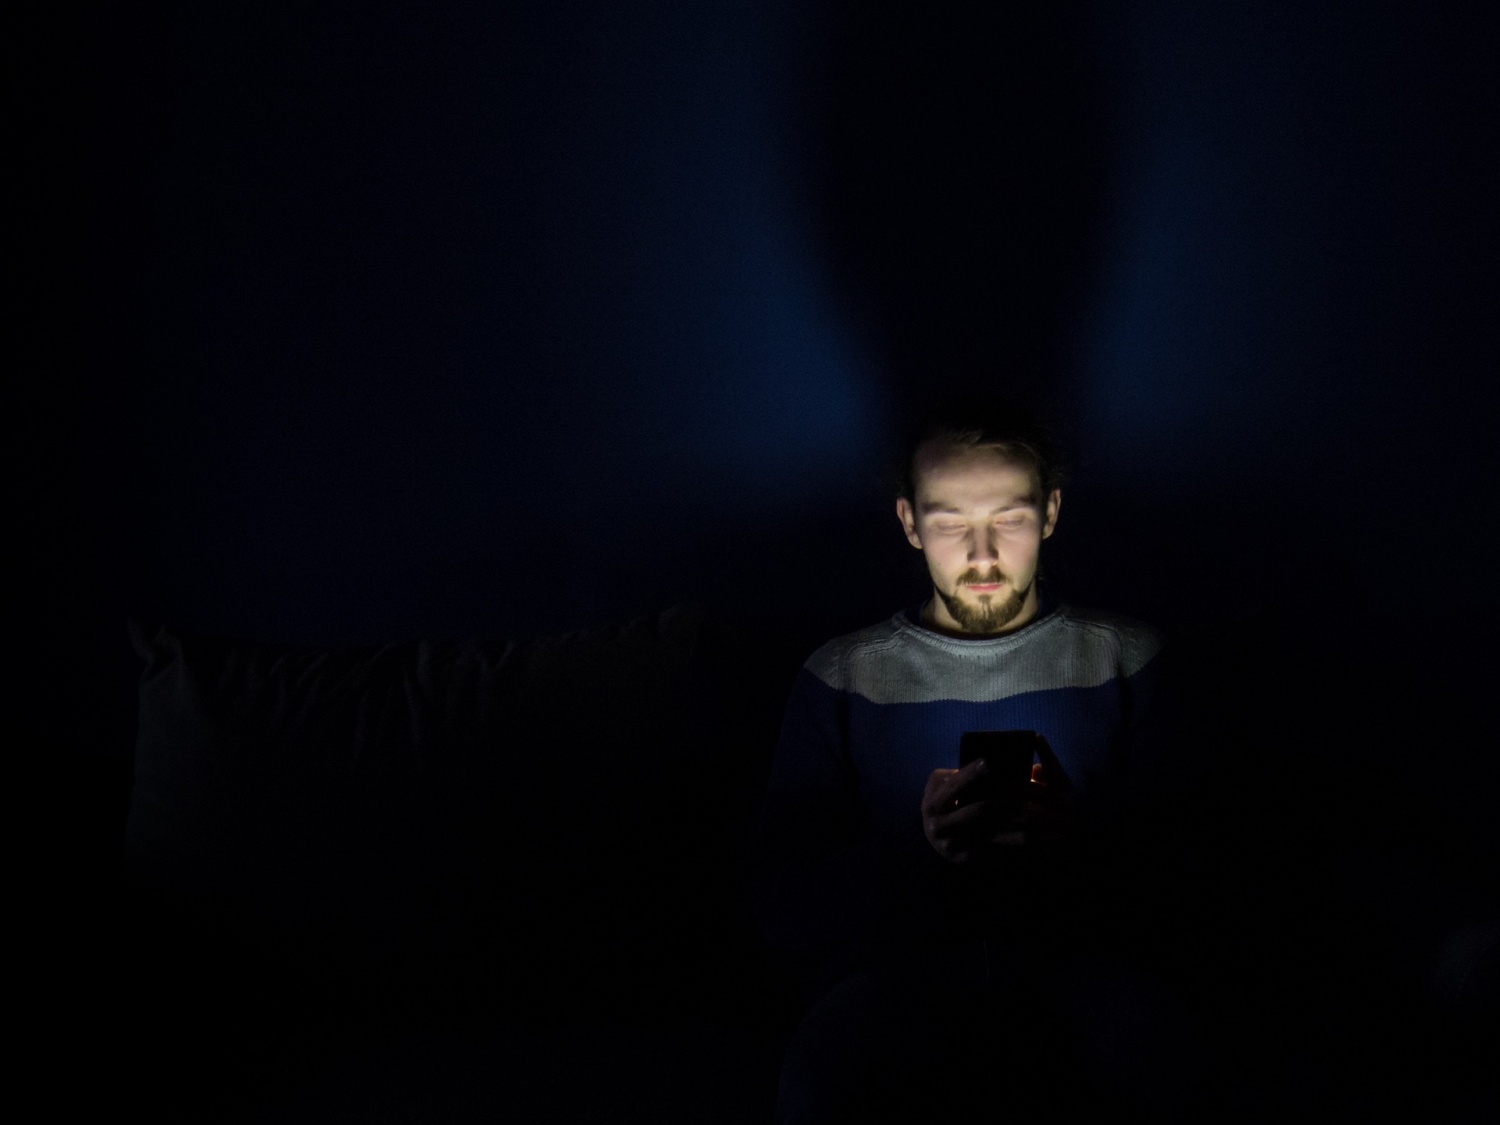 Is Blue Light From Digital Devices Harmful to Human Health? Here's What an International Scientific Panel Has to Say